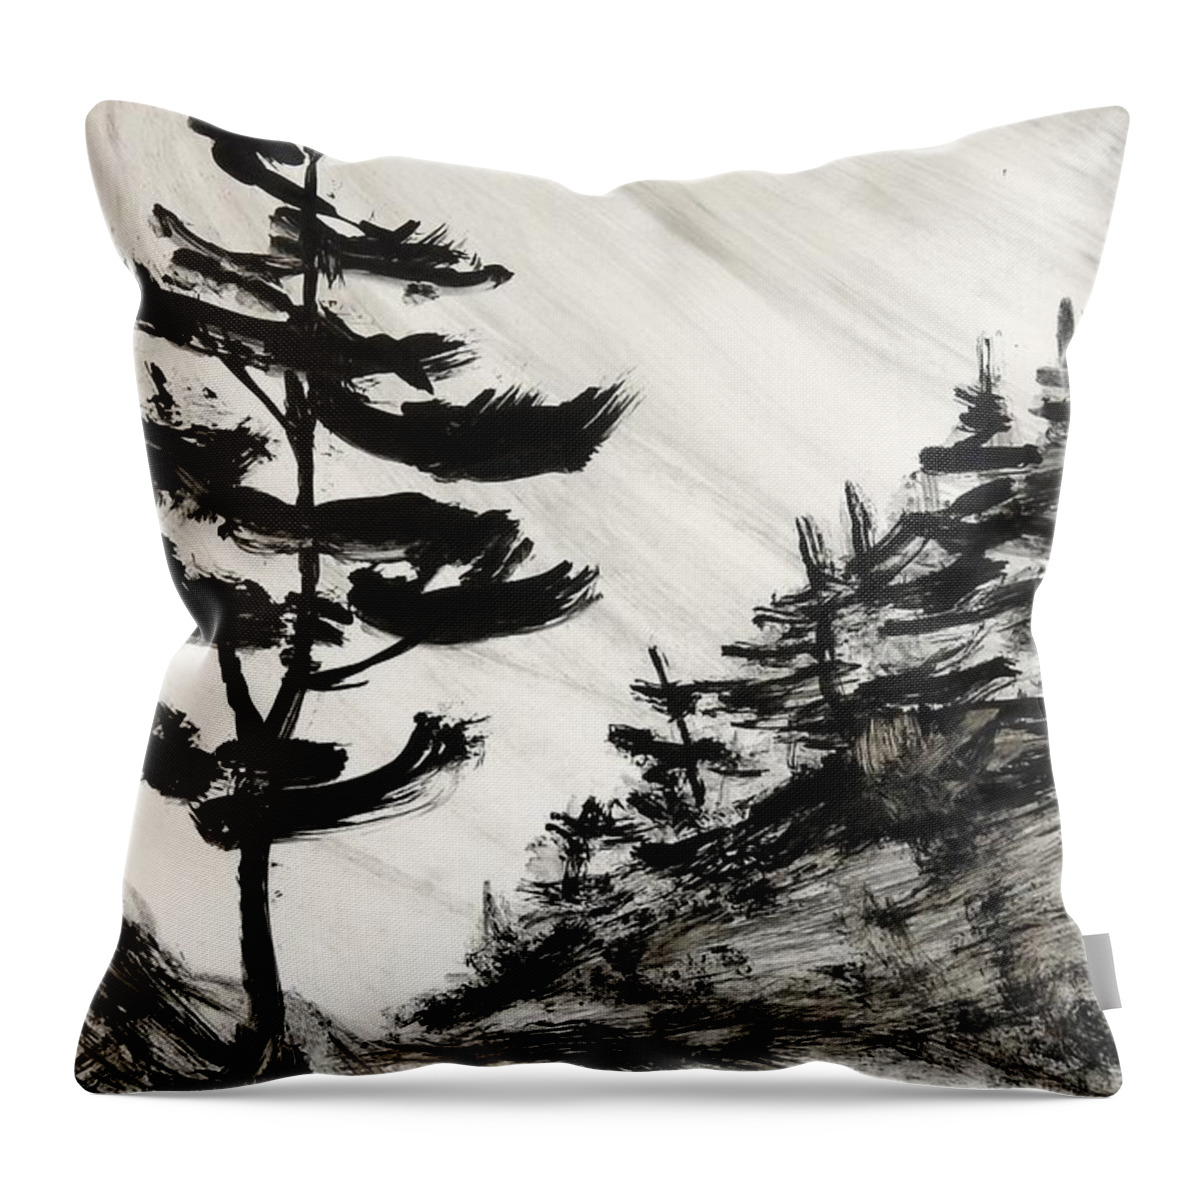 India Ink Throw Pillow featuring the painting Ink Prochade 9 by Petra Burgmann